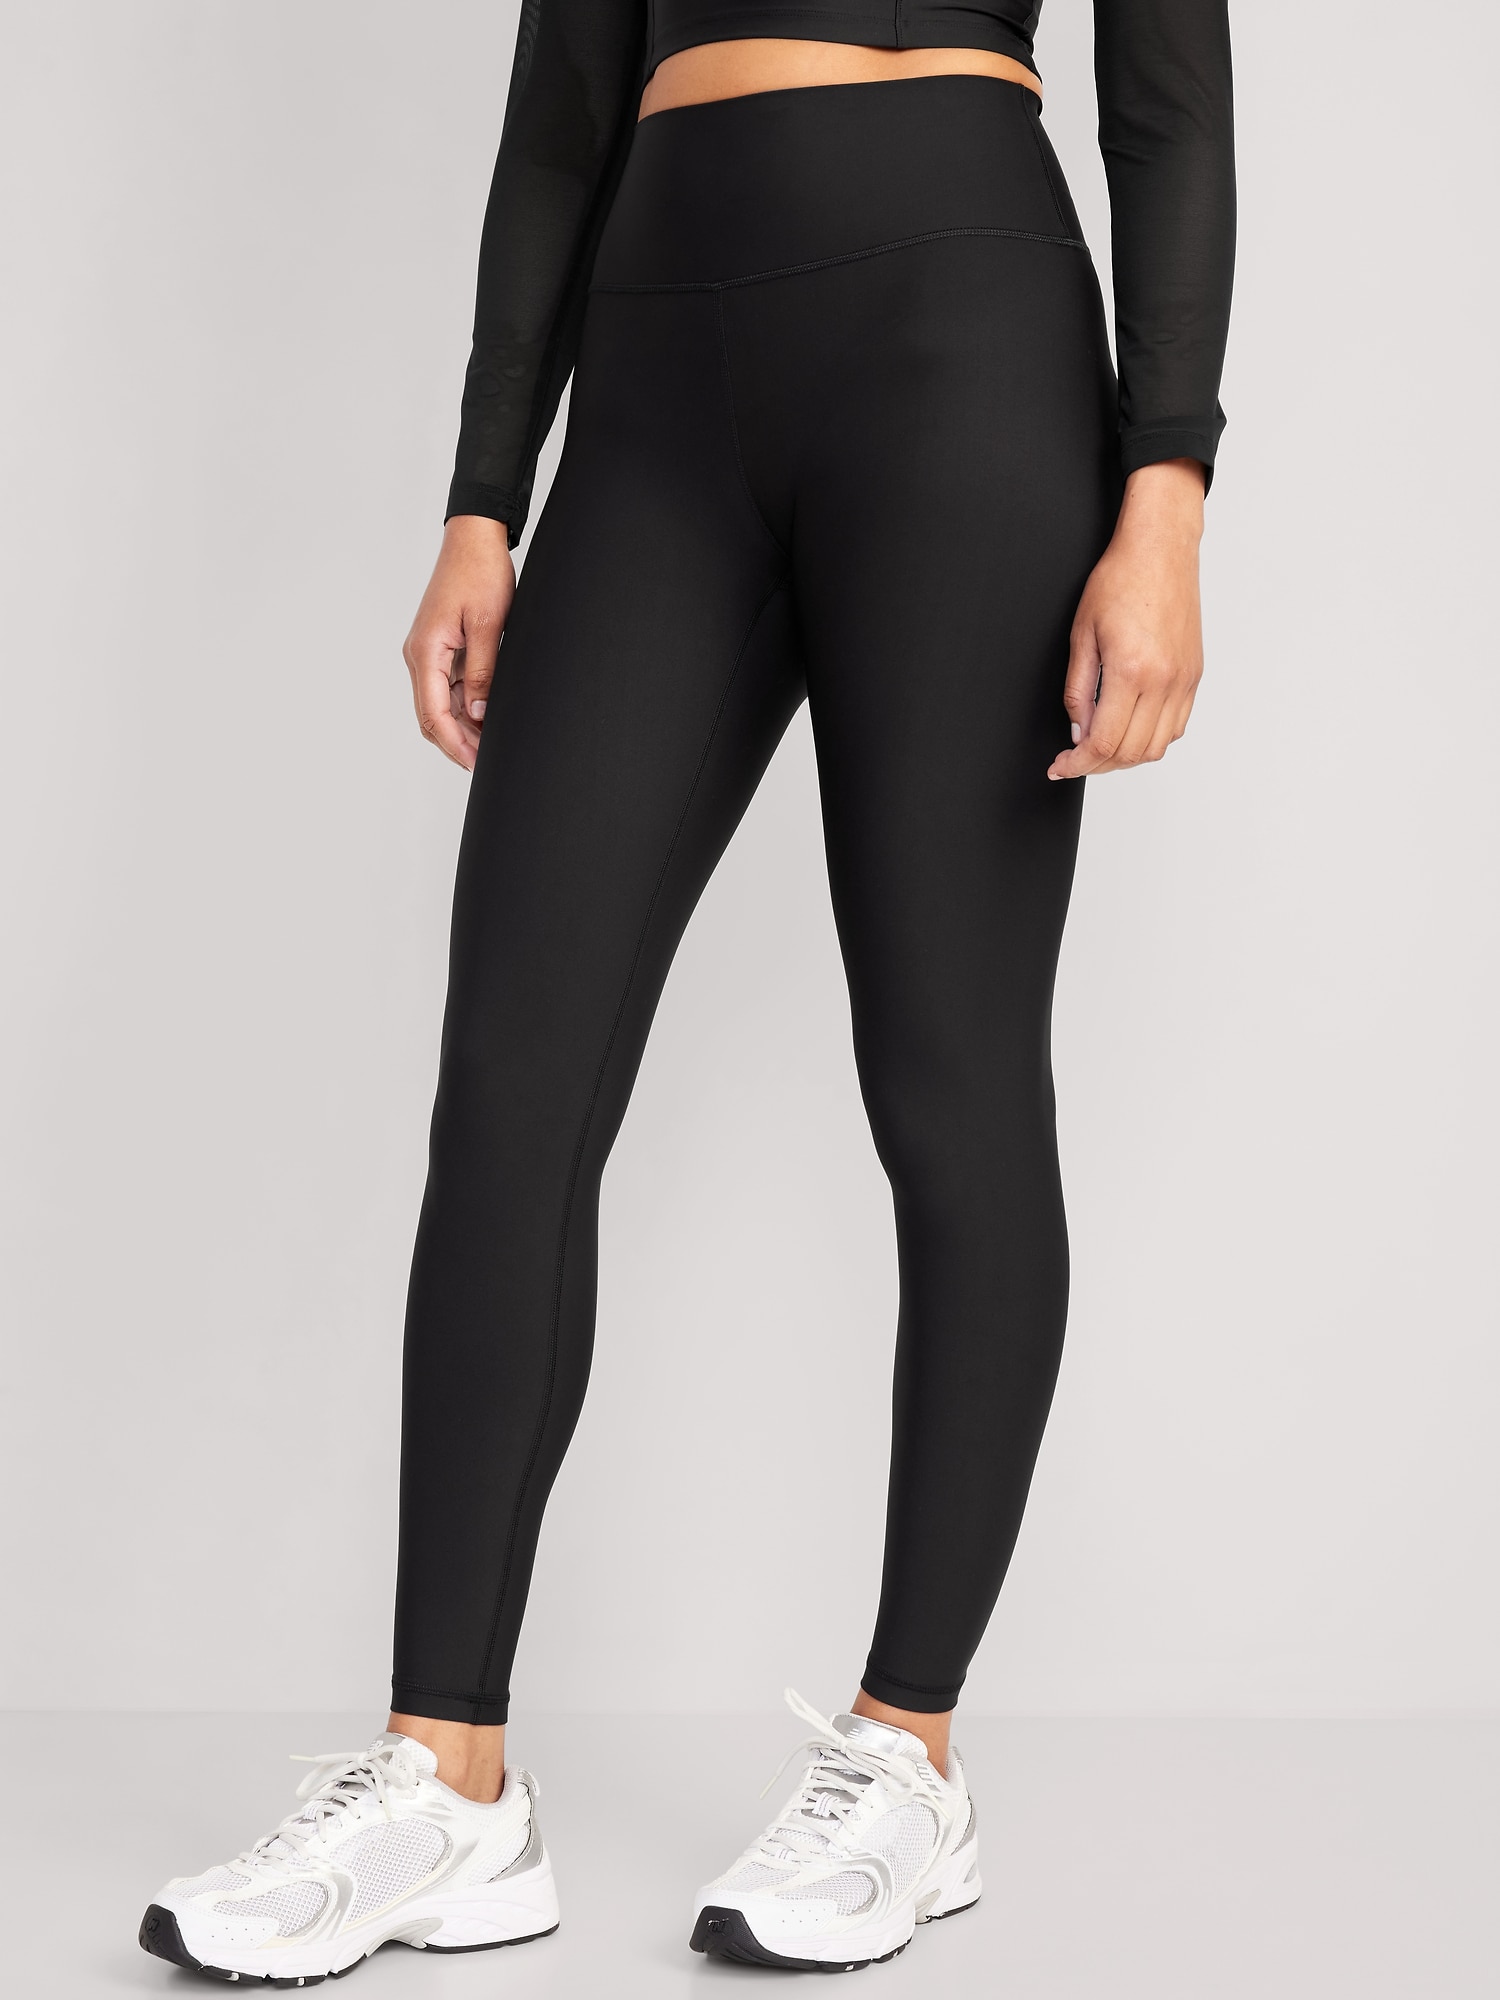 Extra High-Waisted PowerSoft Flare Leggings